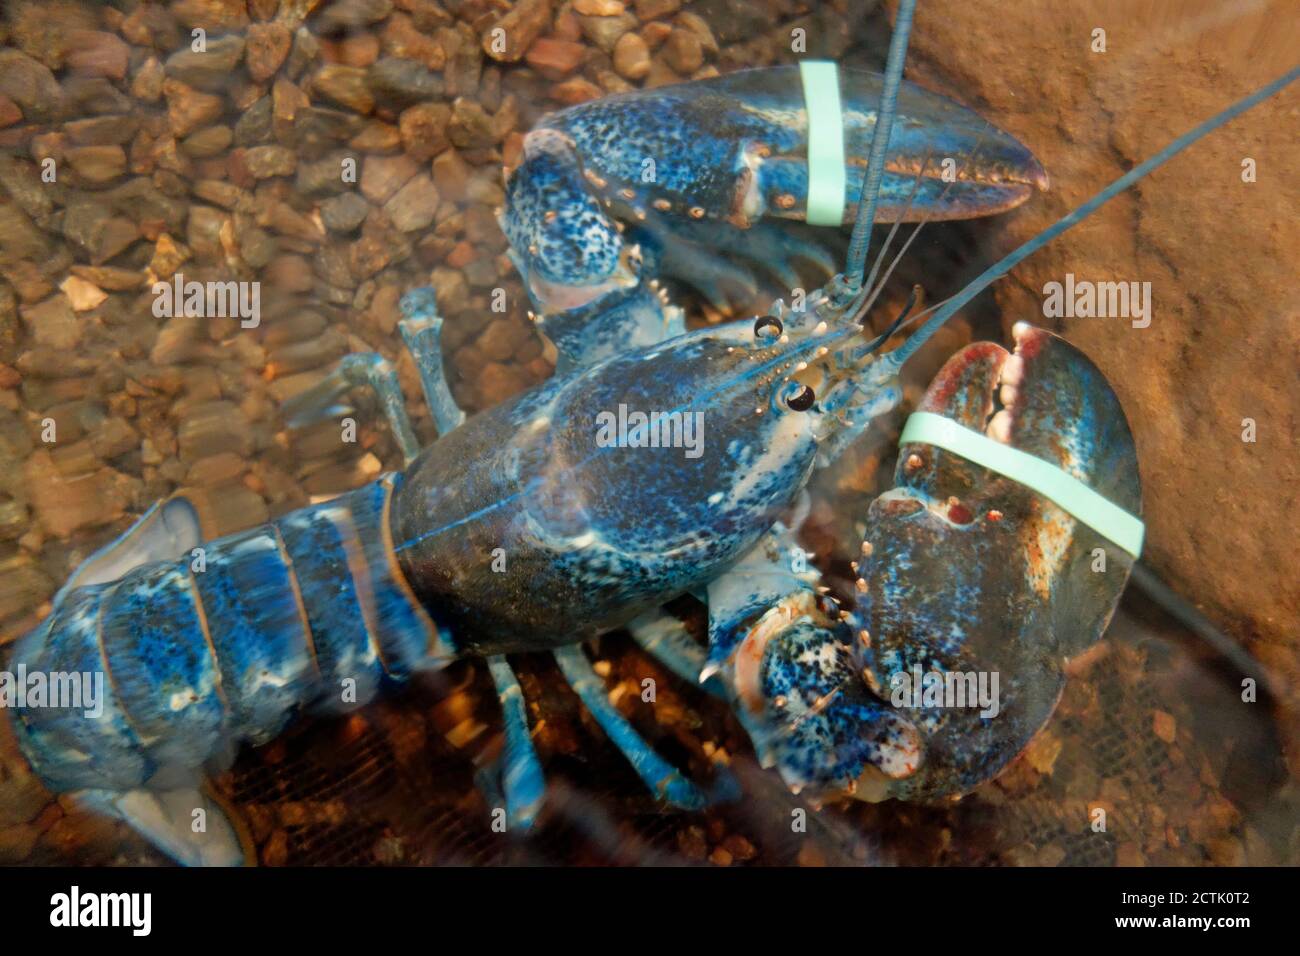 a rare blue american lobster Stock Photo